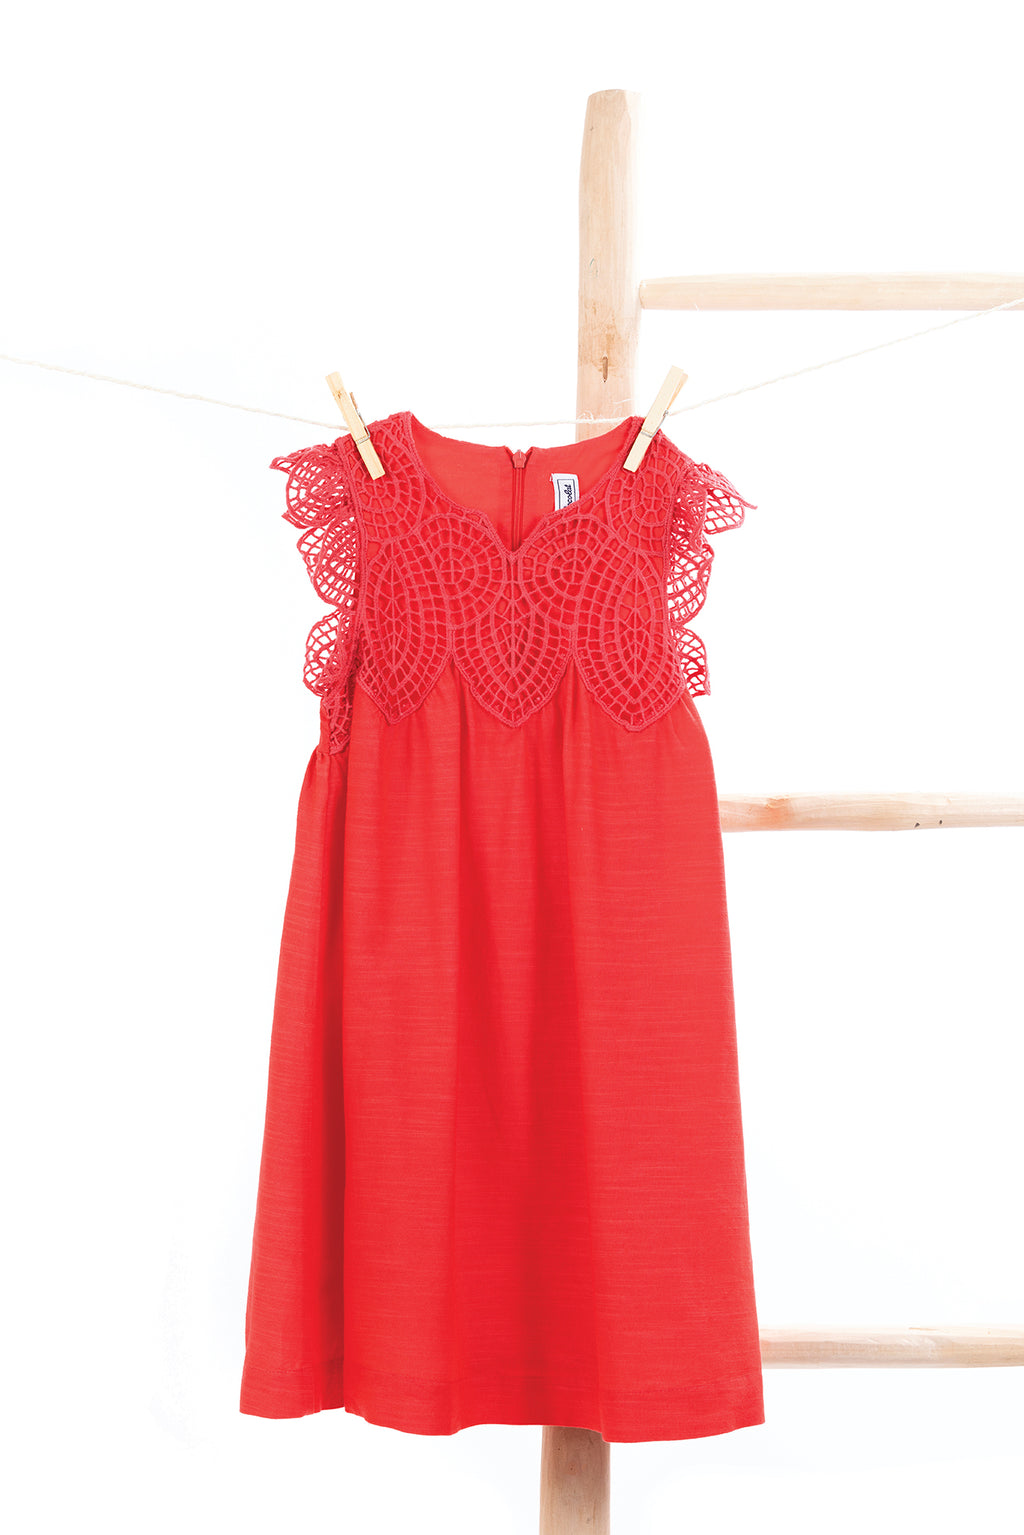 Robe - Rouge broderie coton